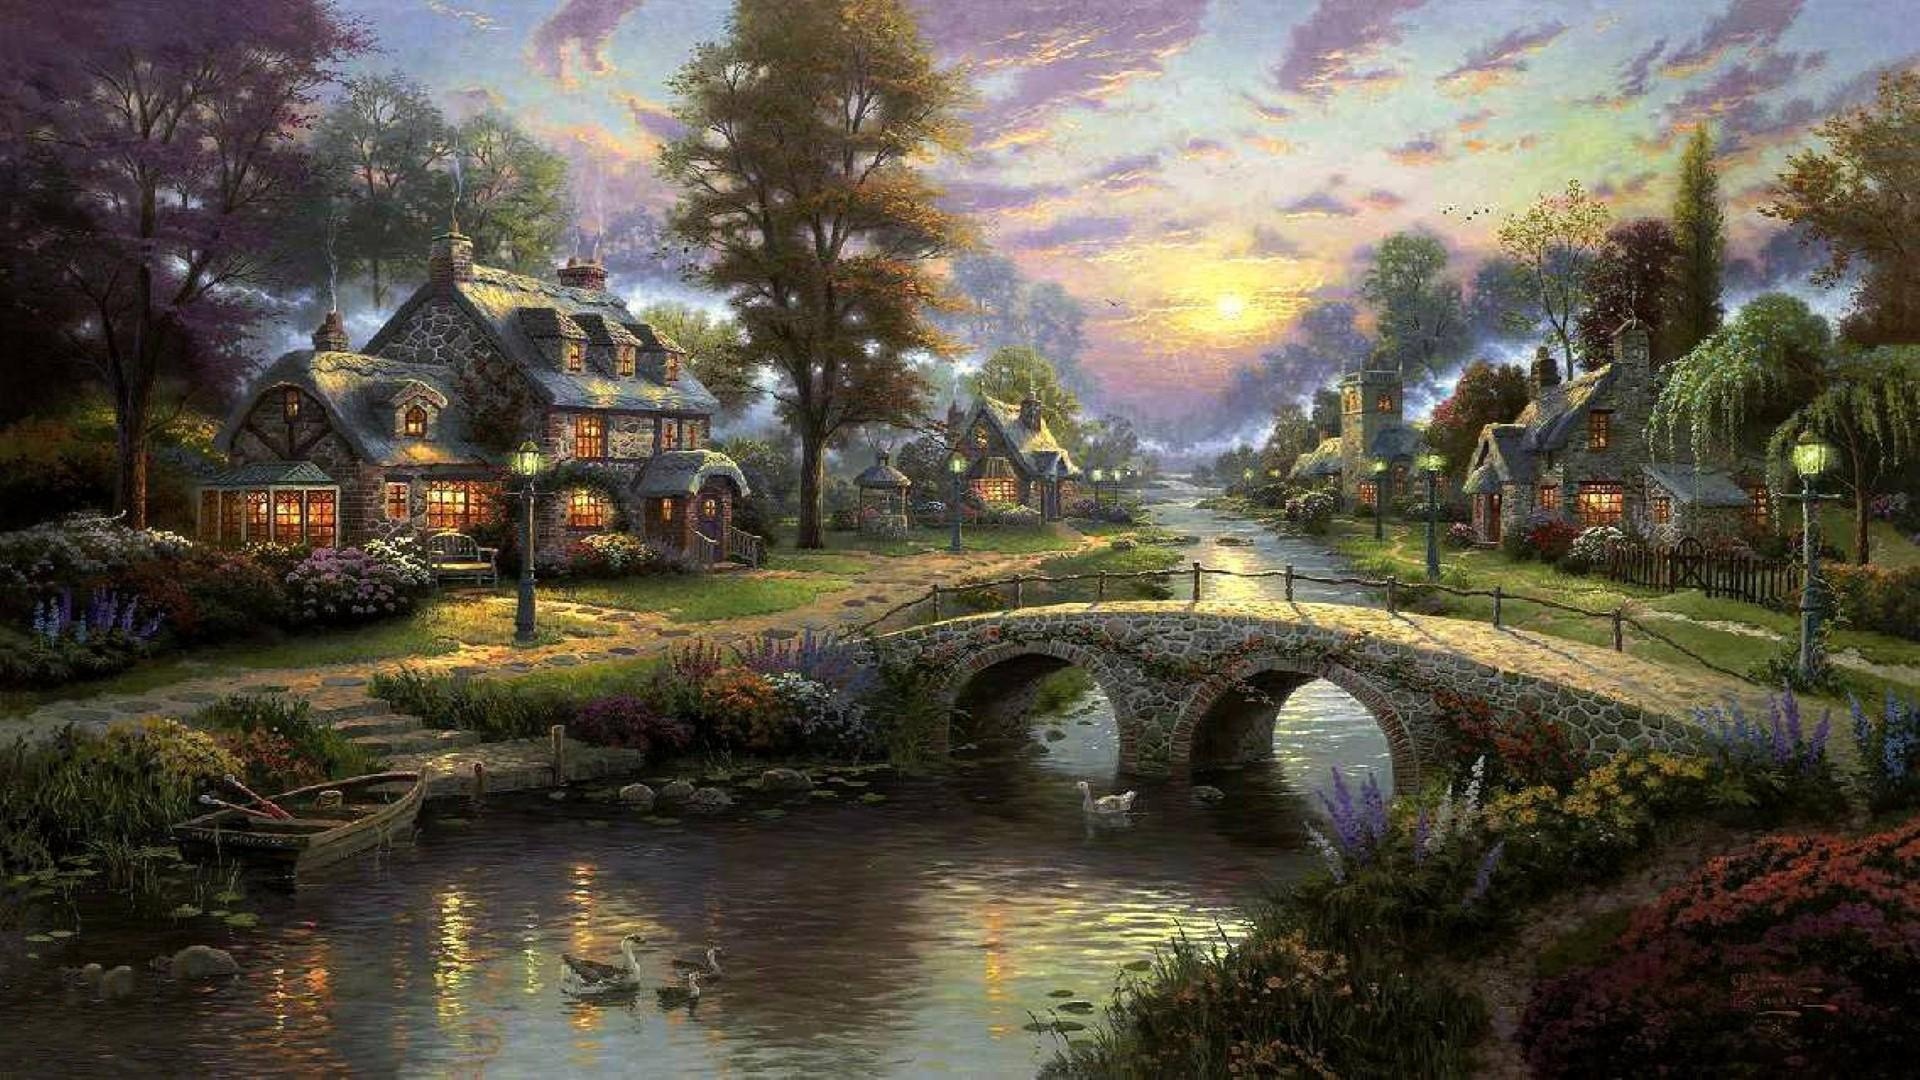 Captivating village, Enchanting scenery, Serenity at its best, Tranquil lifestyle, 1920x1080 Full HD Desktop